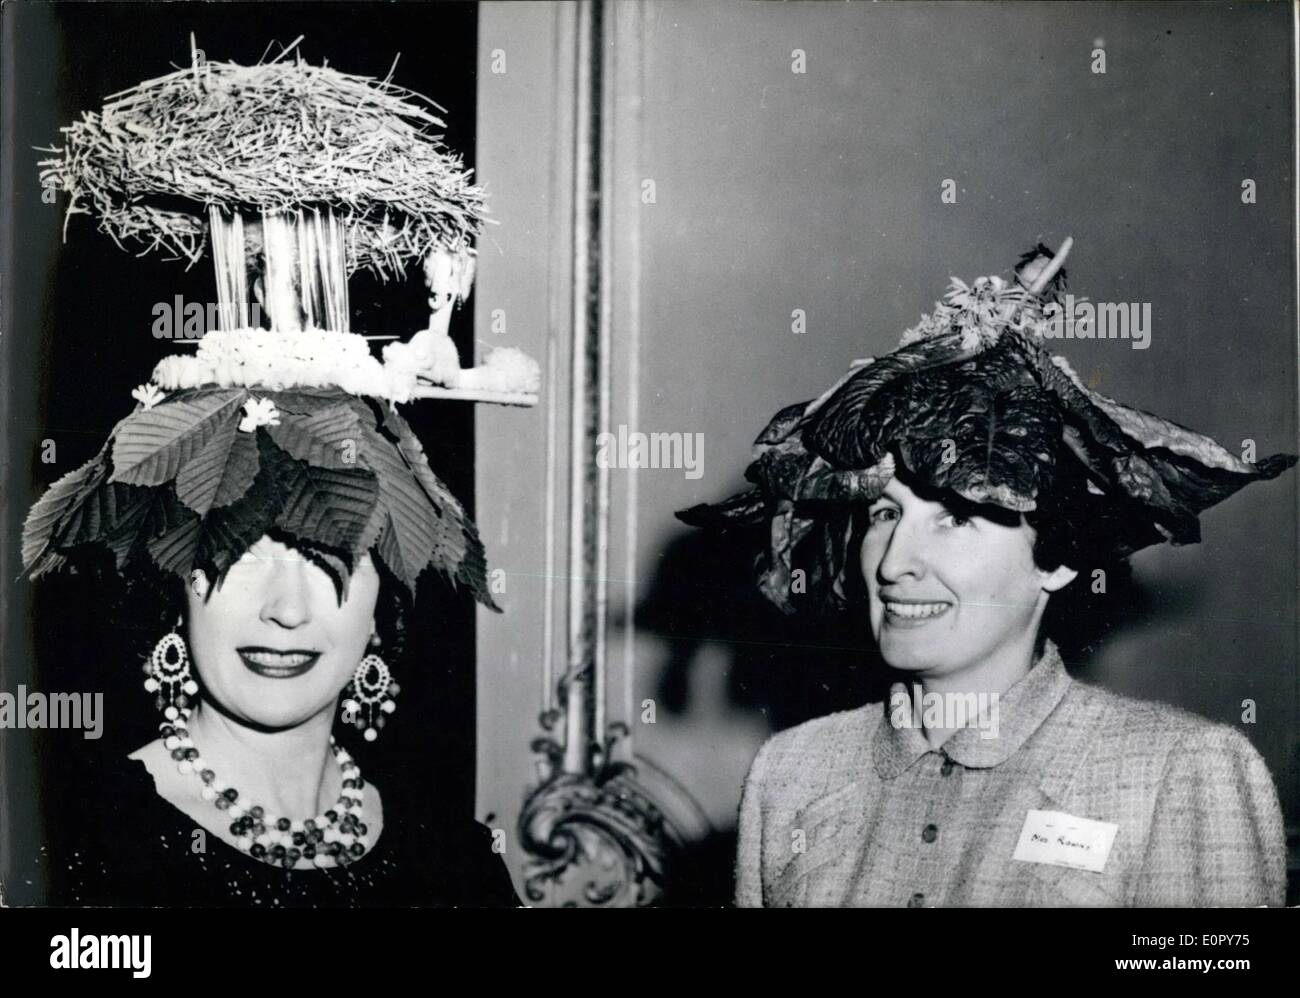 May 05, 1957 - Mad hatters party ay Shape Village.: A 'mad hatters party'' was held at Chateu d'Hennemont, the Shape Village yesterday. Photo shows two of the fancy hats seen at the ball. Stock Photo